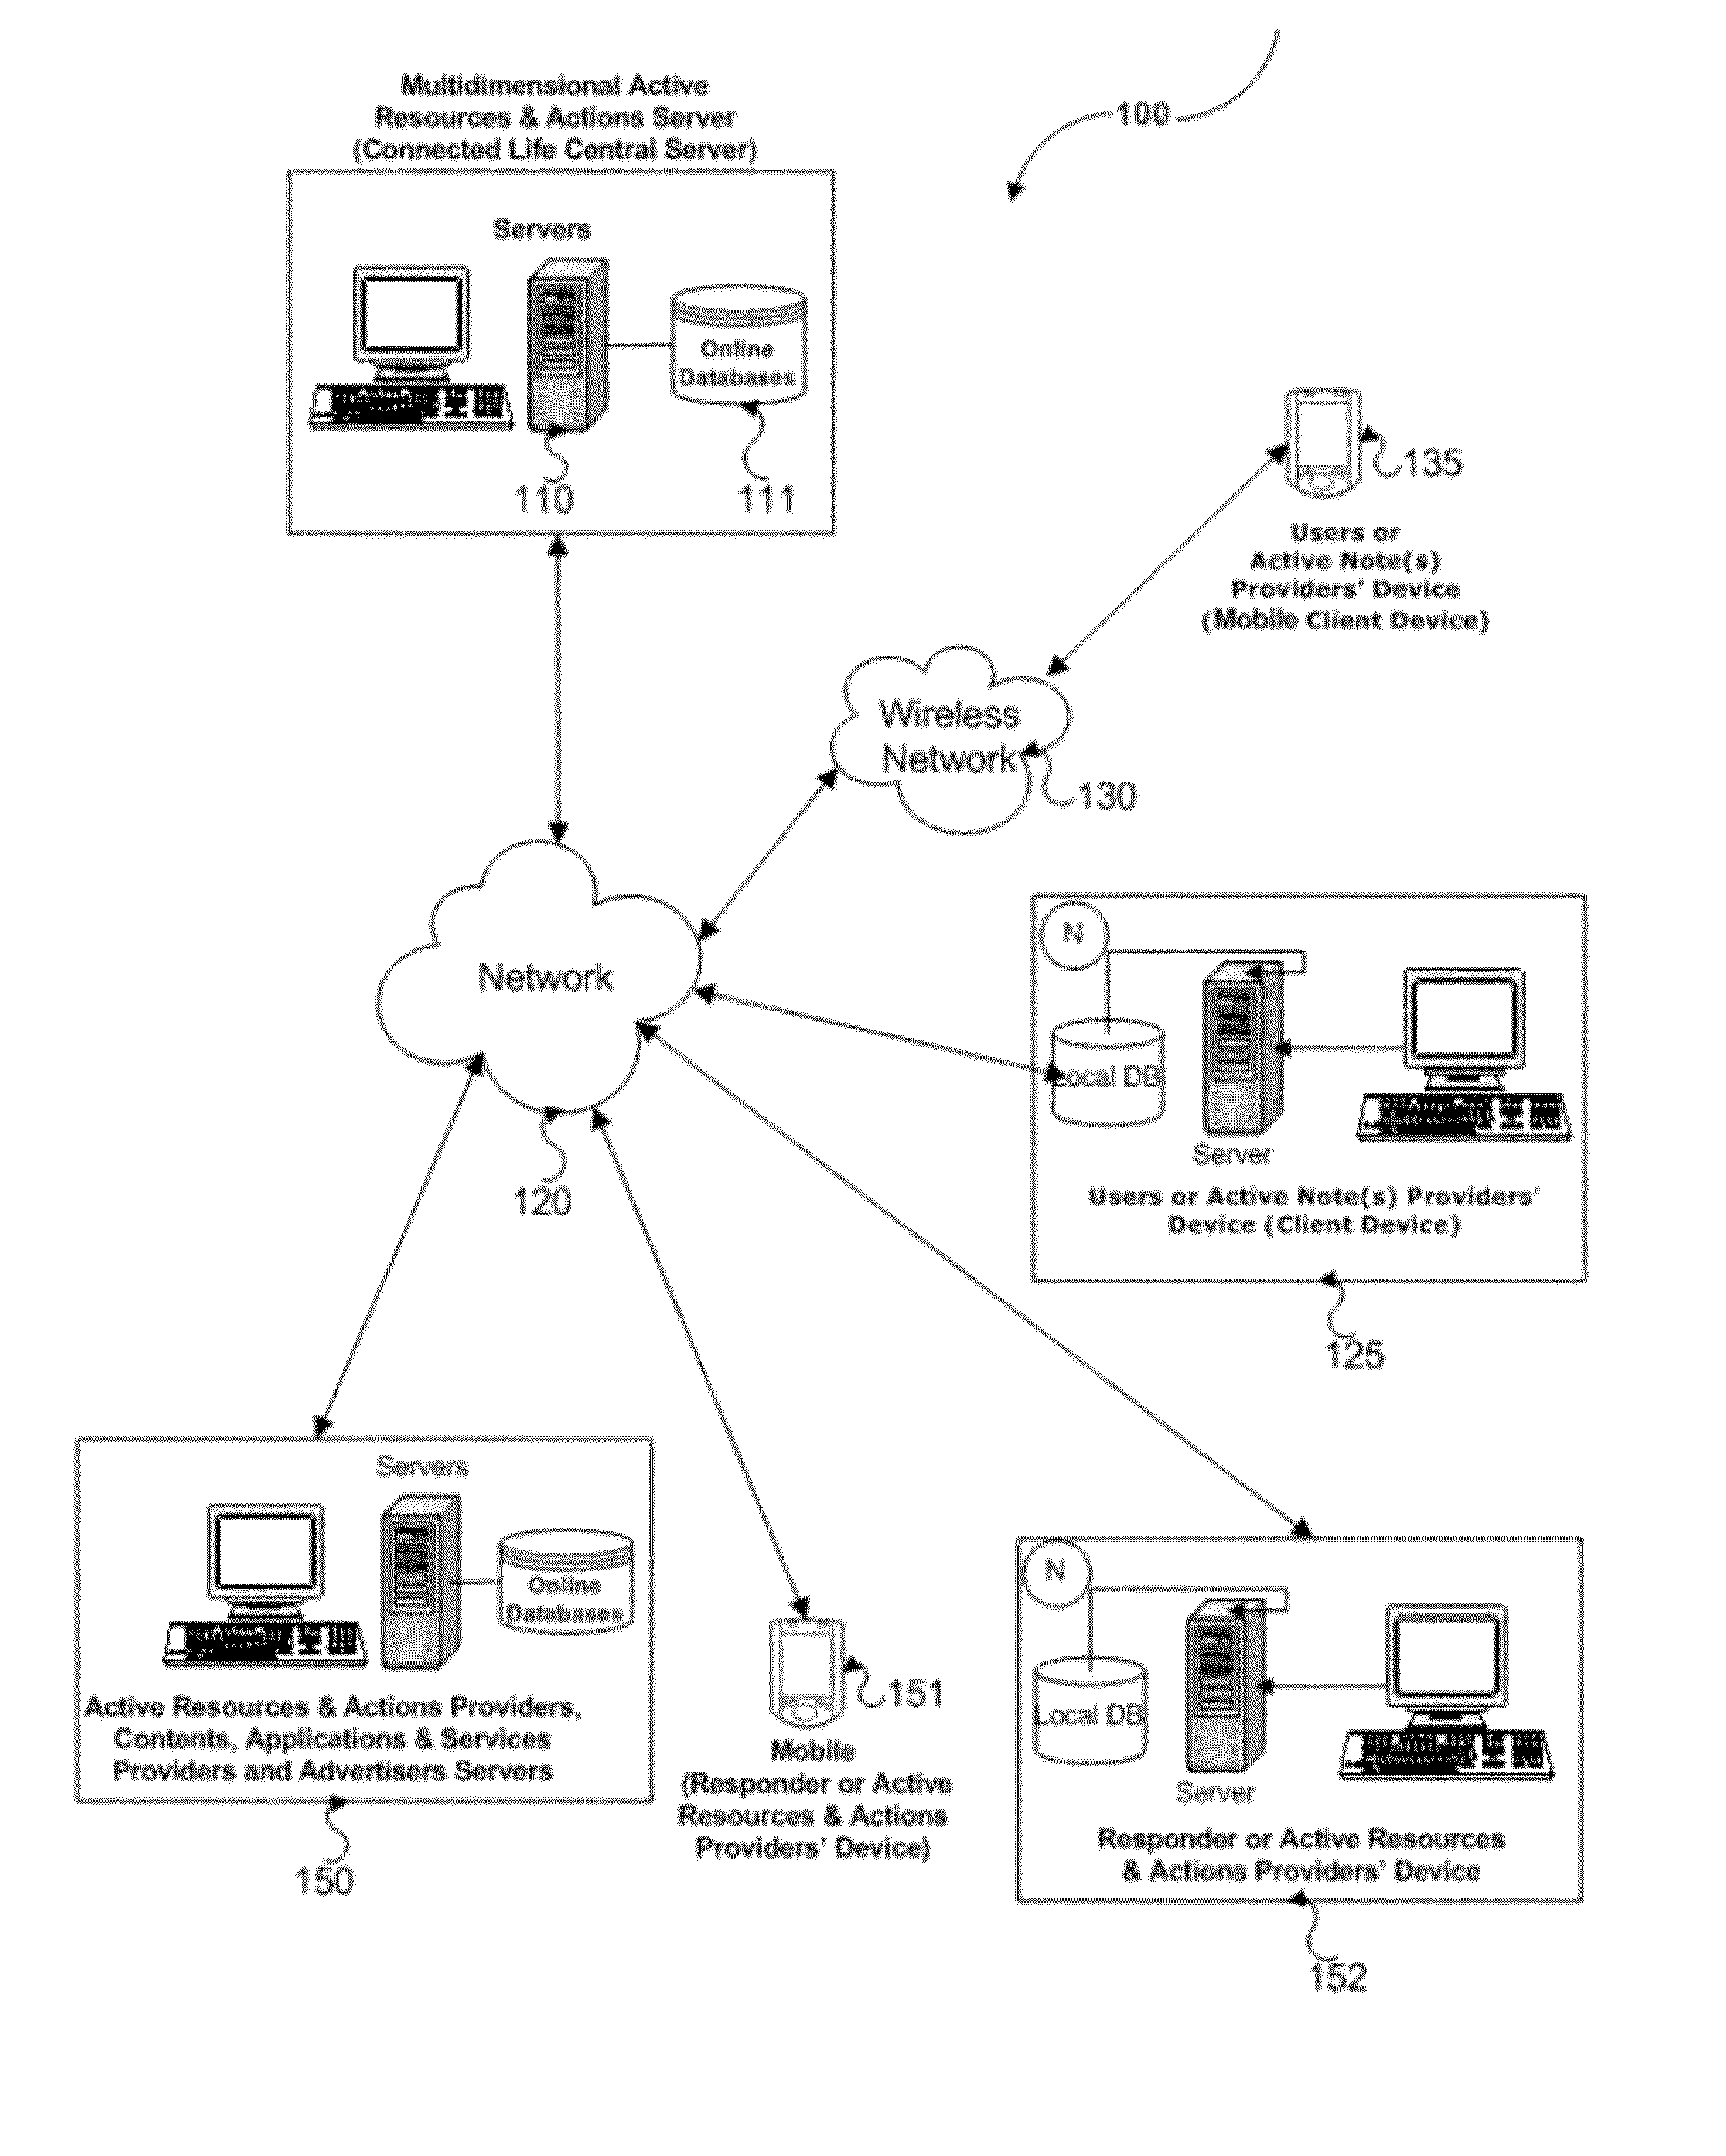 System and method for social networking for managing multidimensional life stream related active note(s) and associated multidimensional active resources and actions